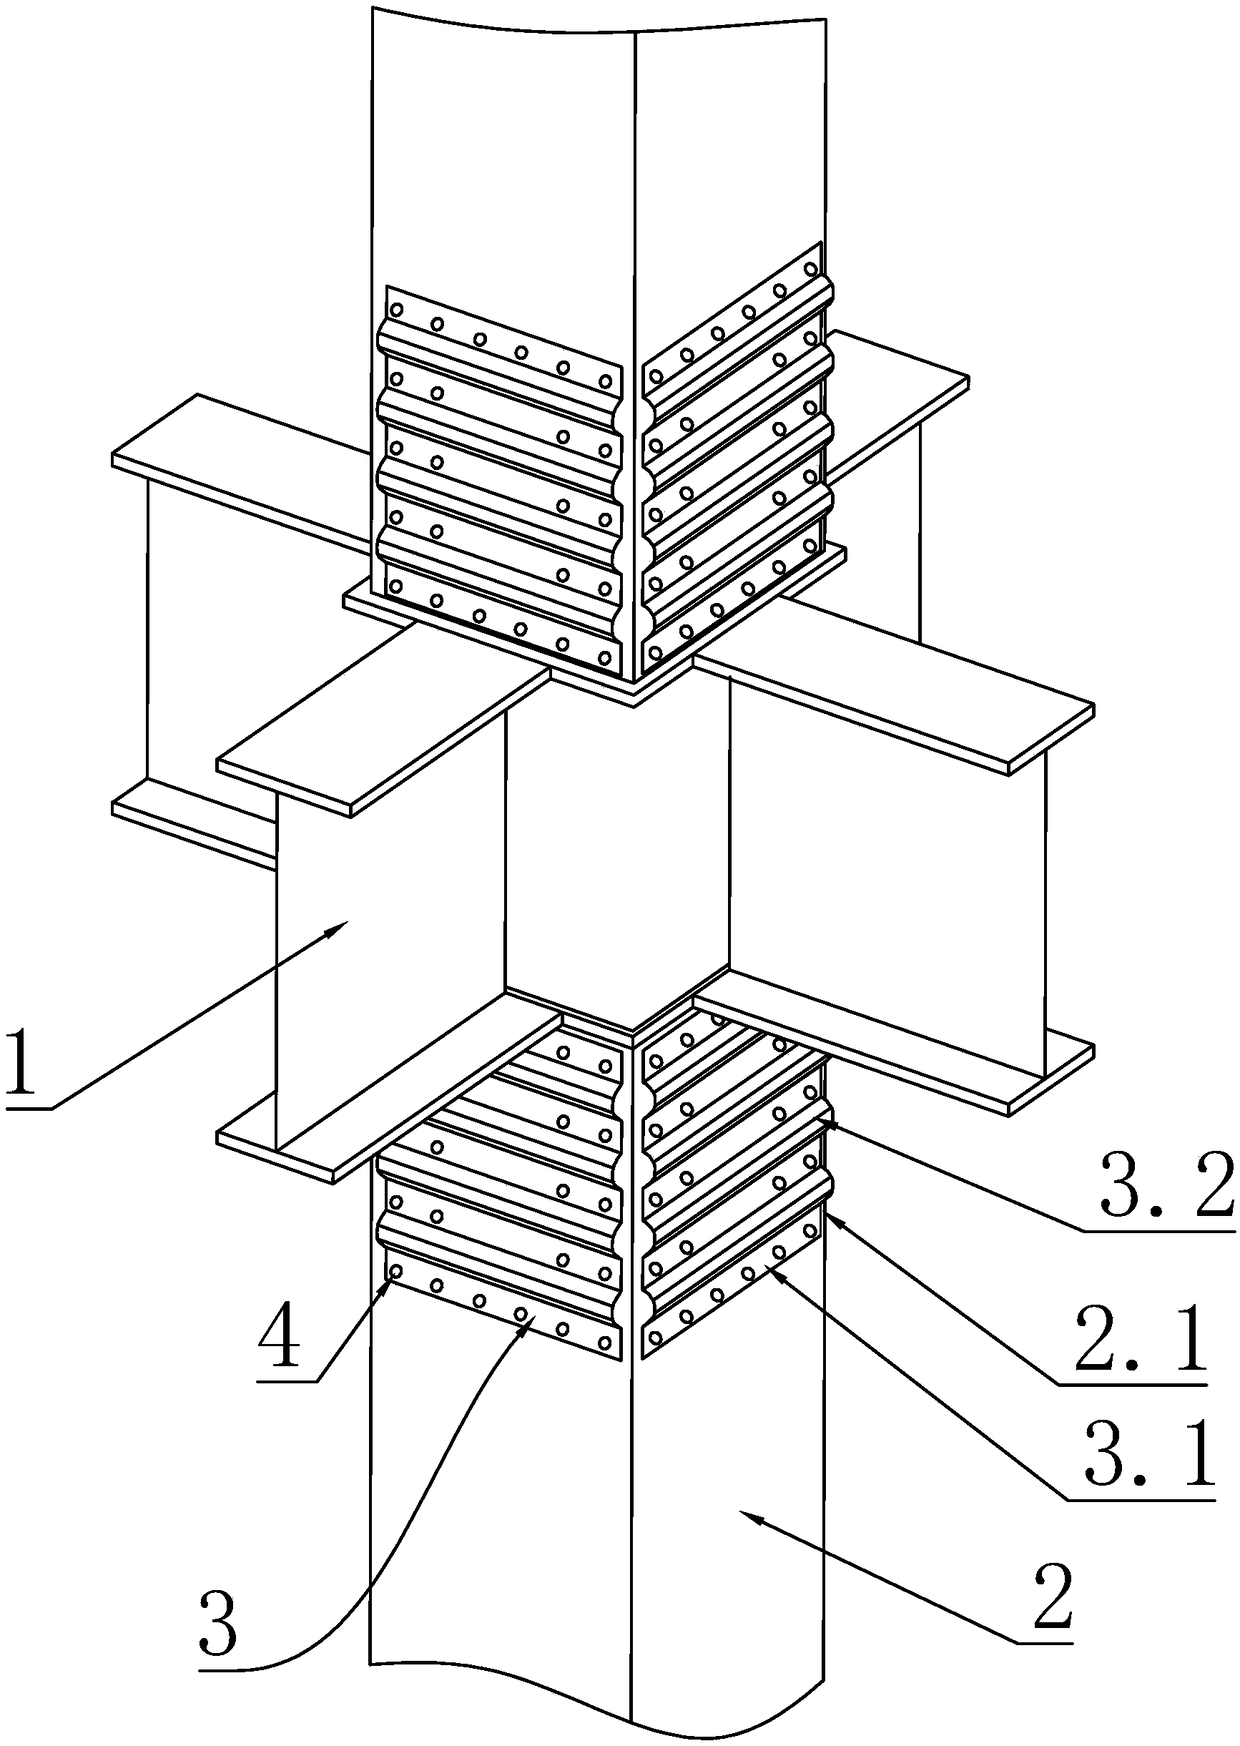 Reinforcing structure of square steel column